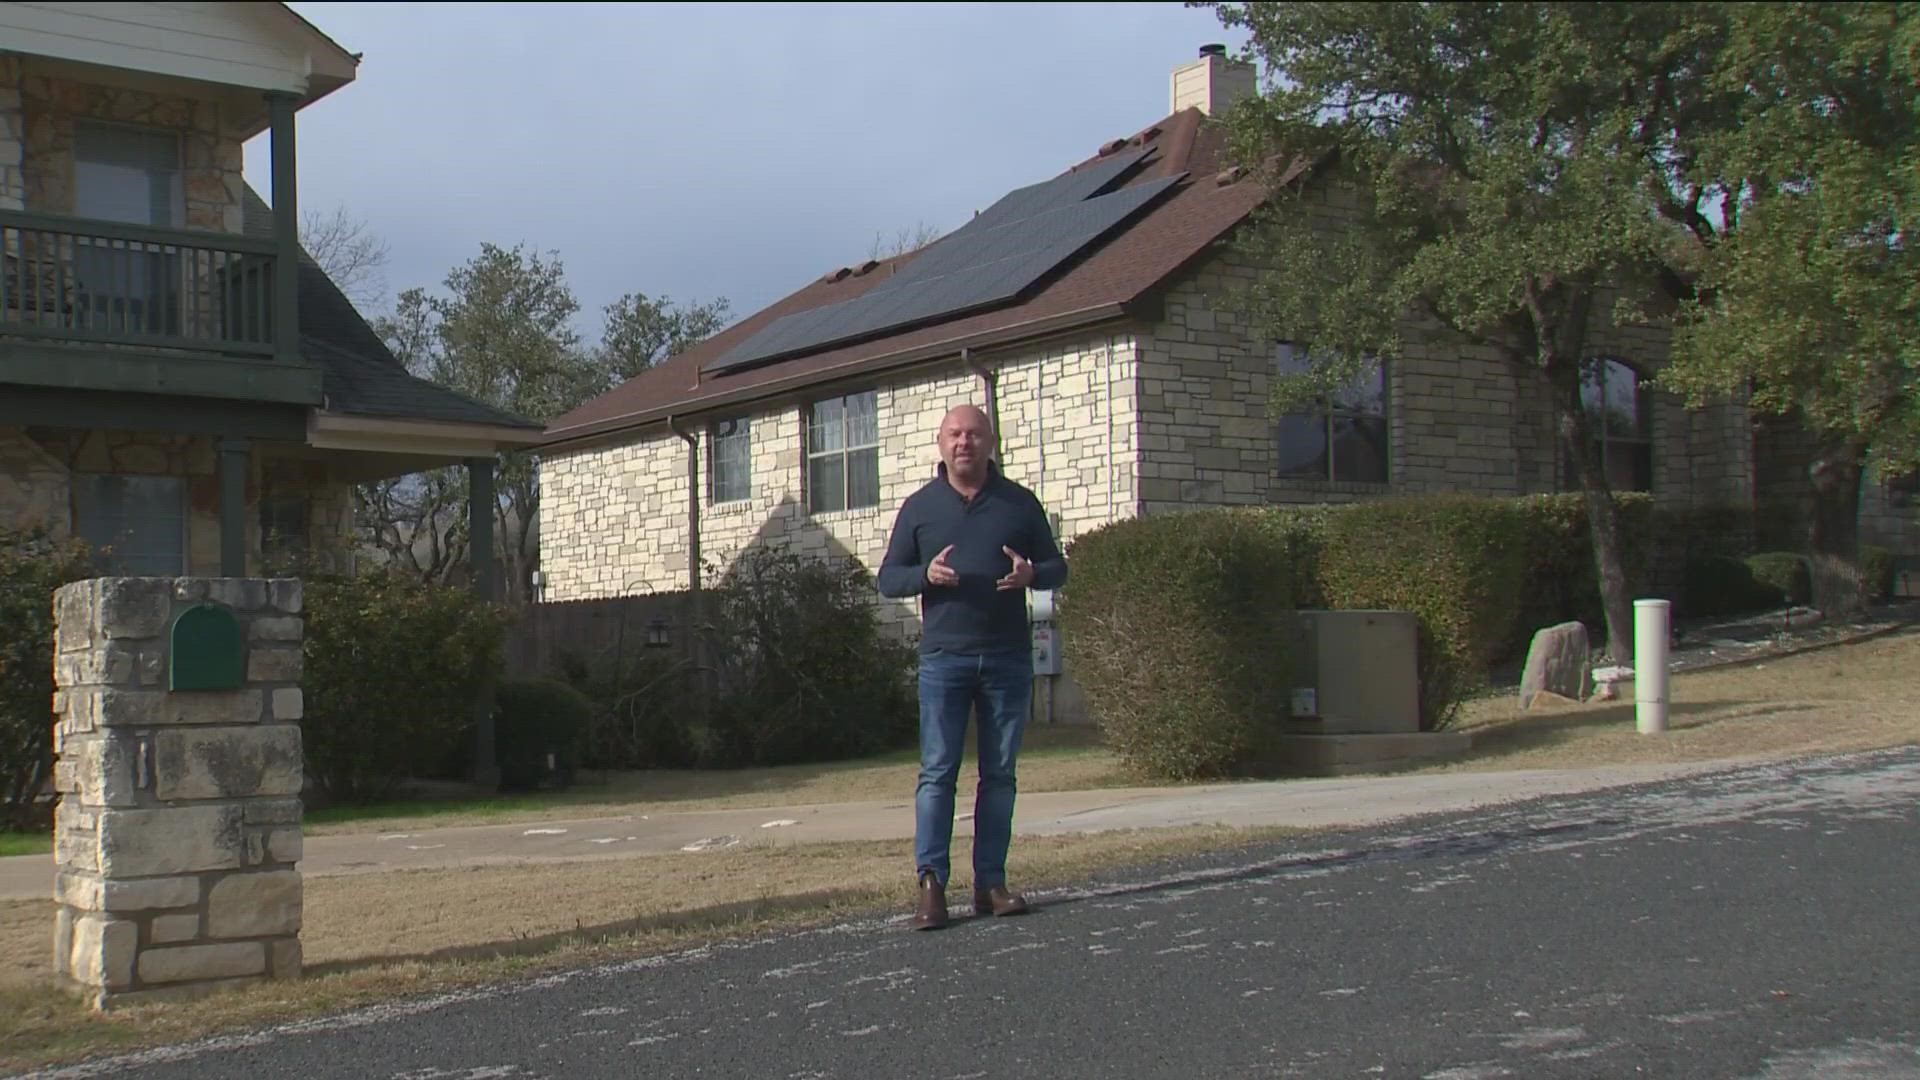 Following the recent ice storm, some frustrated homeowners are looking for solutions. KVUE spoke with a couple who struggles with outages and invested in solar.